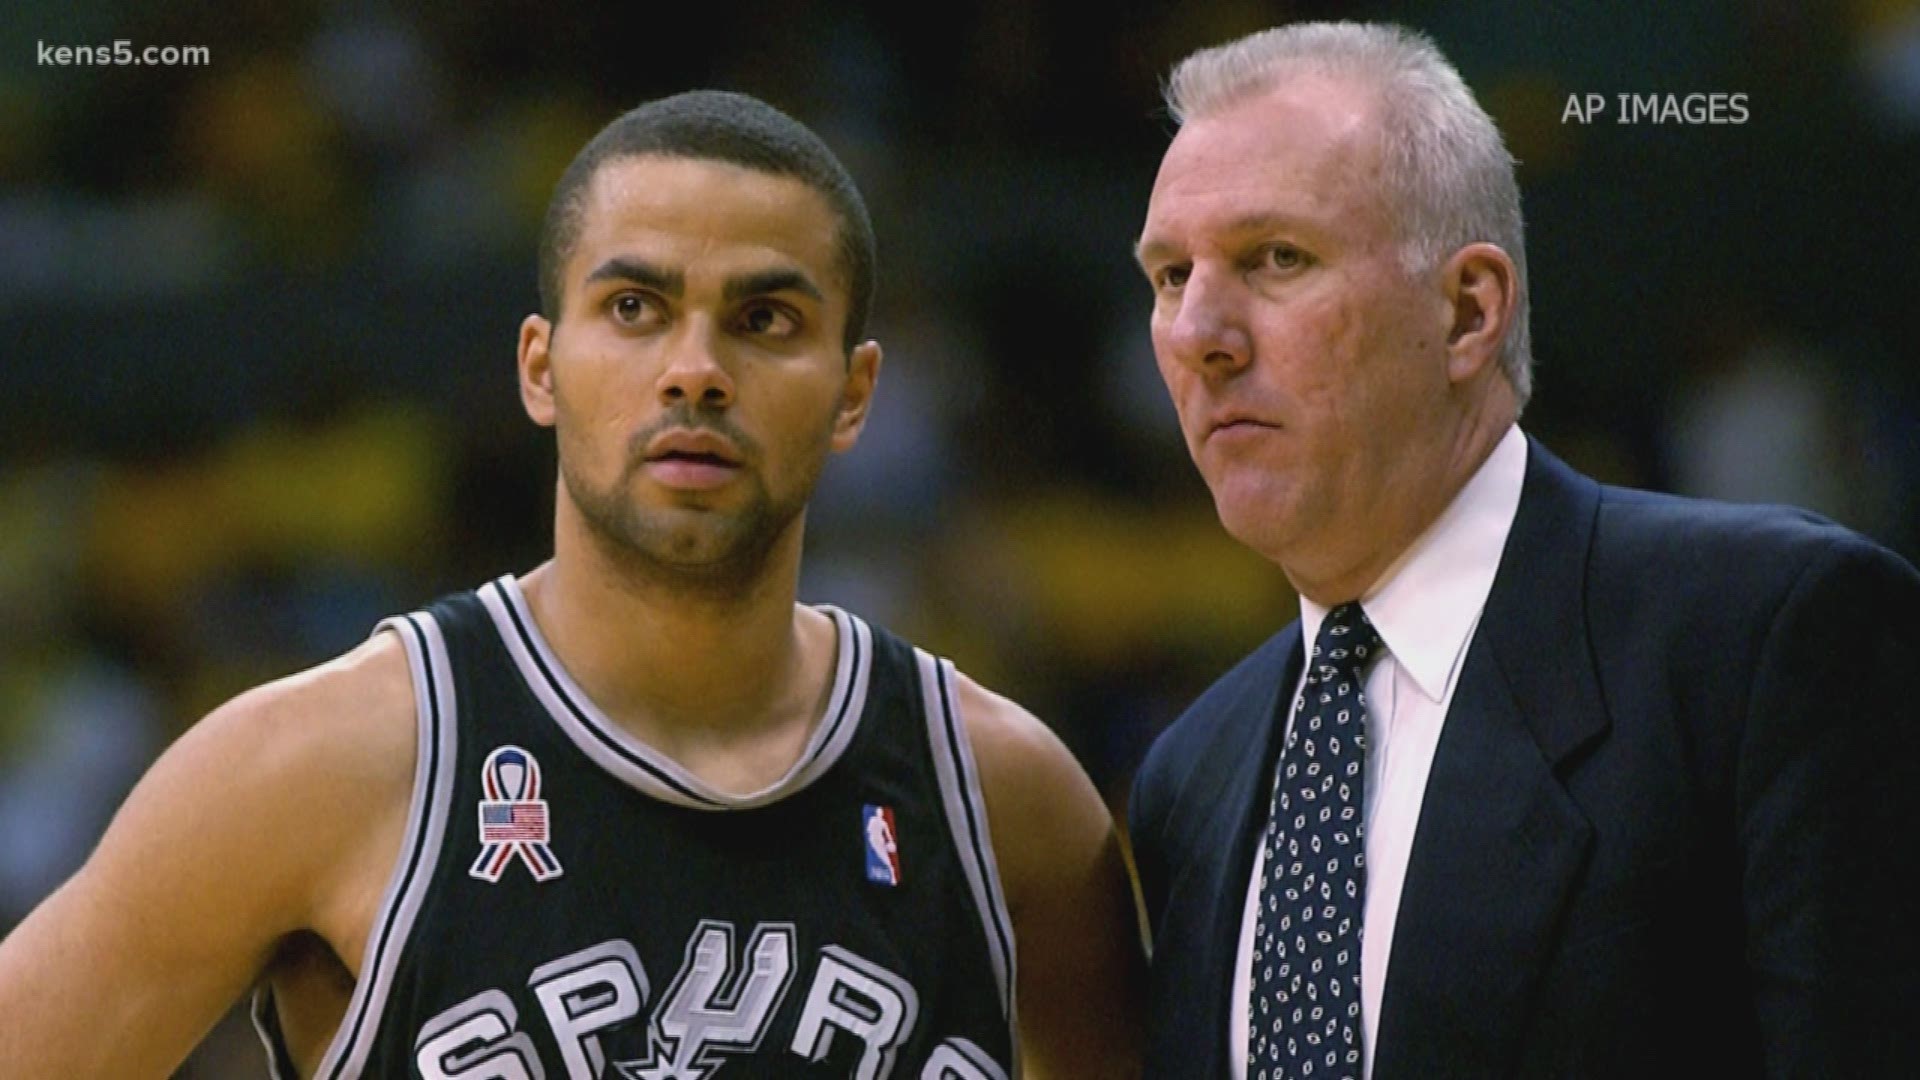 Former San Antonio Spur says family contracted COVID-19